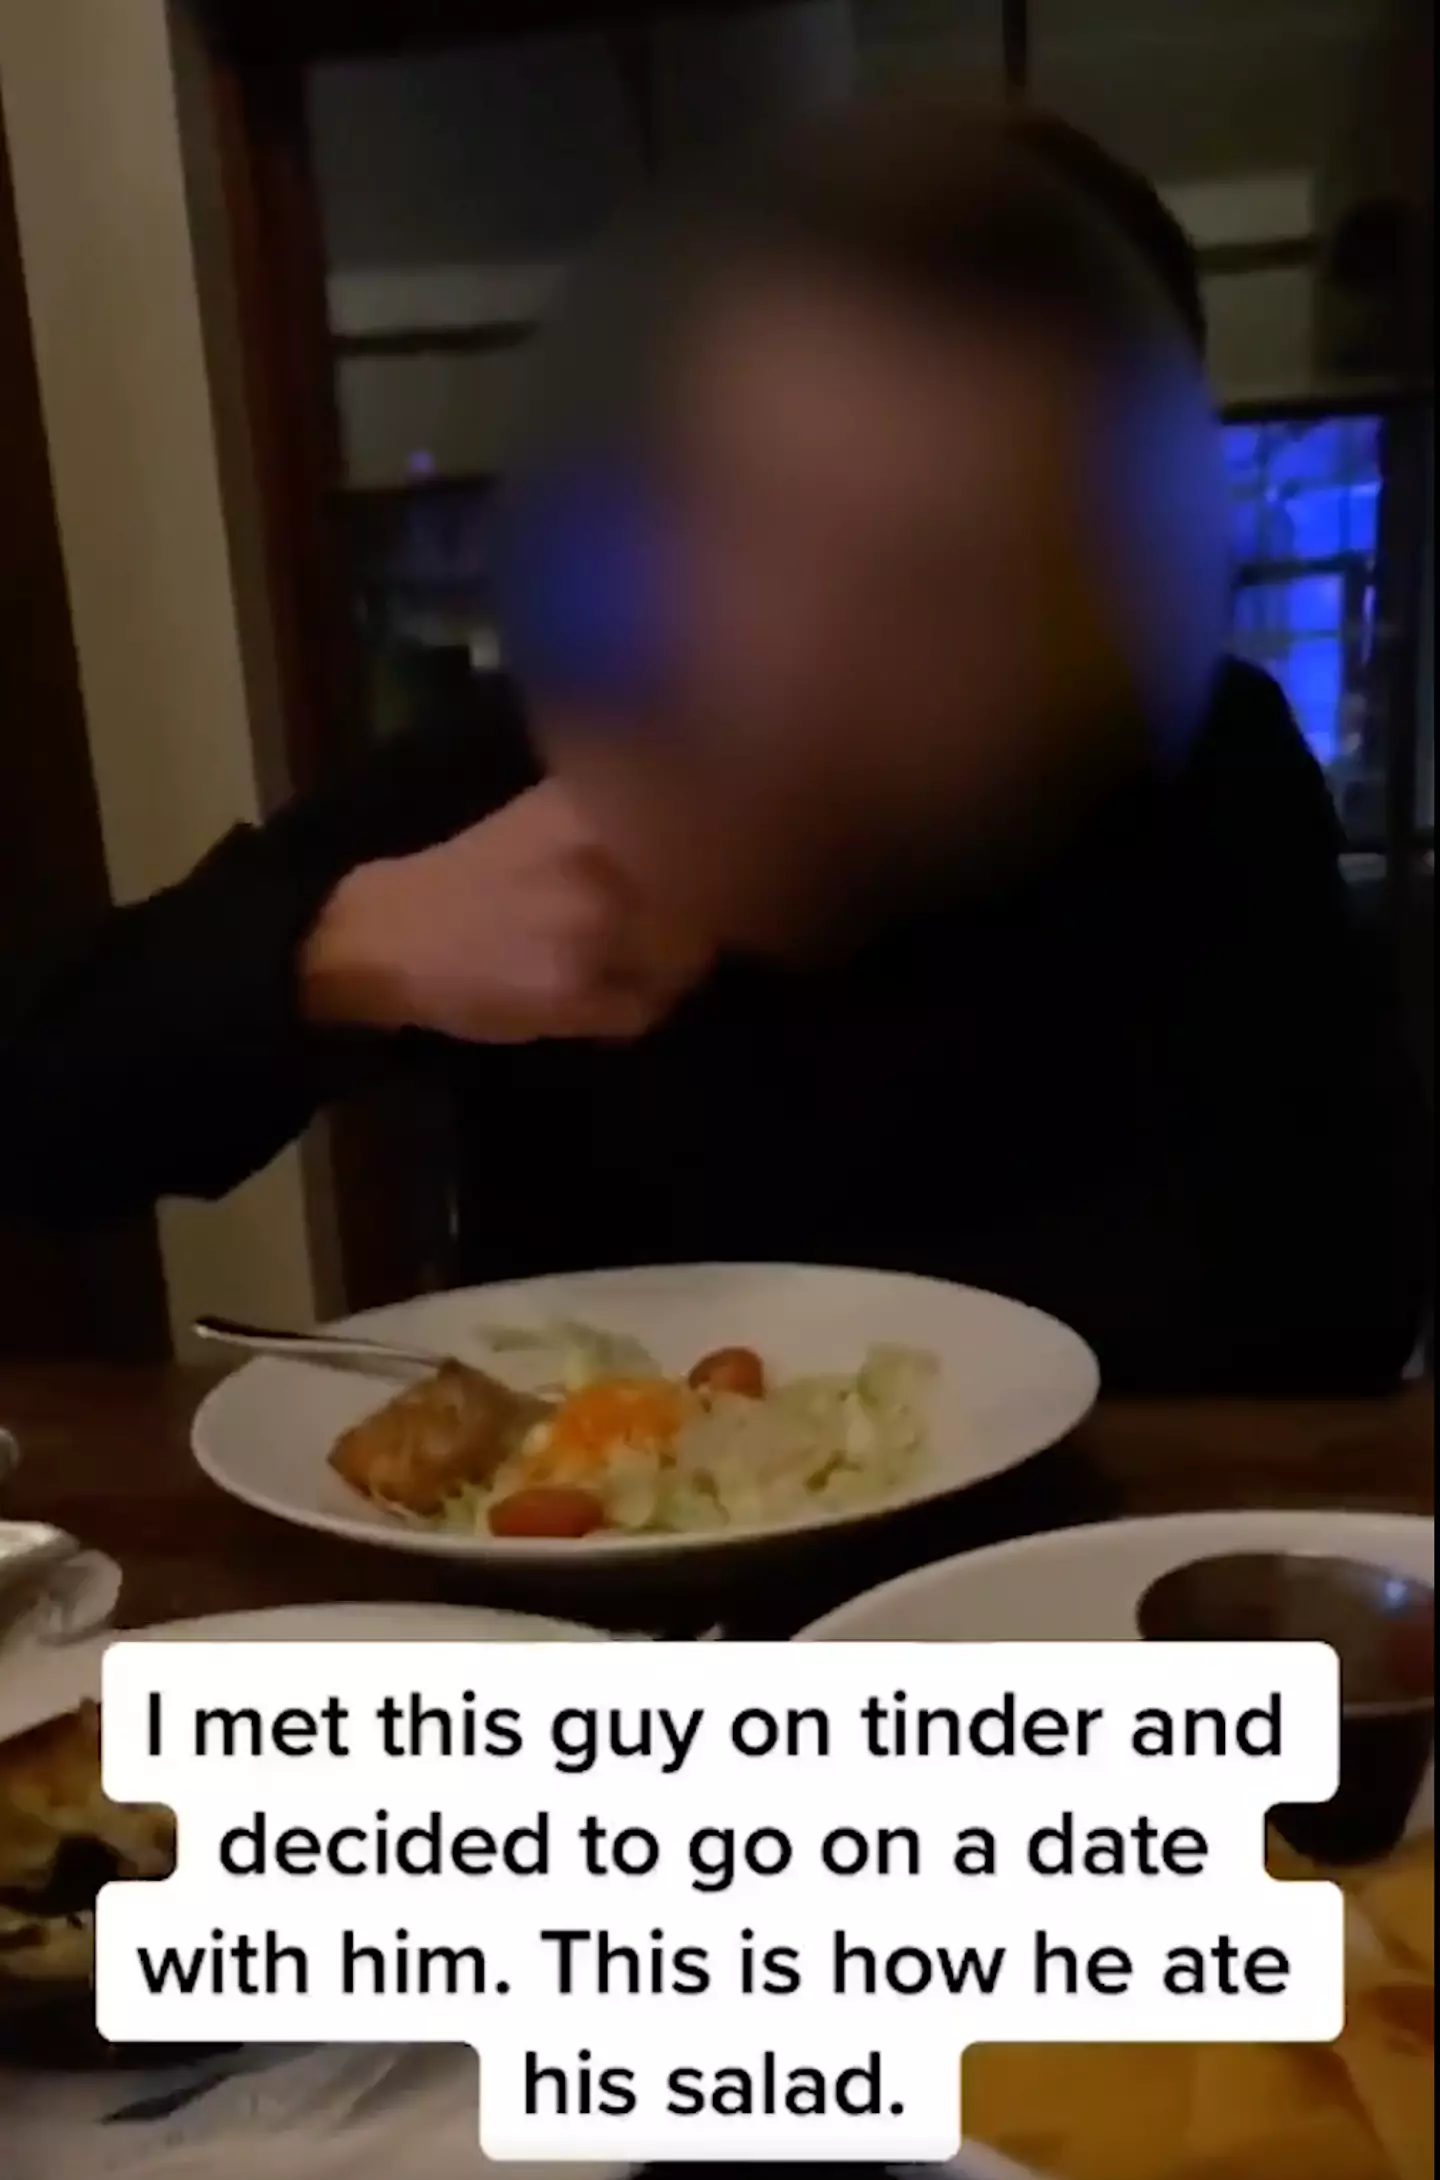 The woman was left unimpressed by her date's salad eating technique (